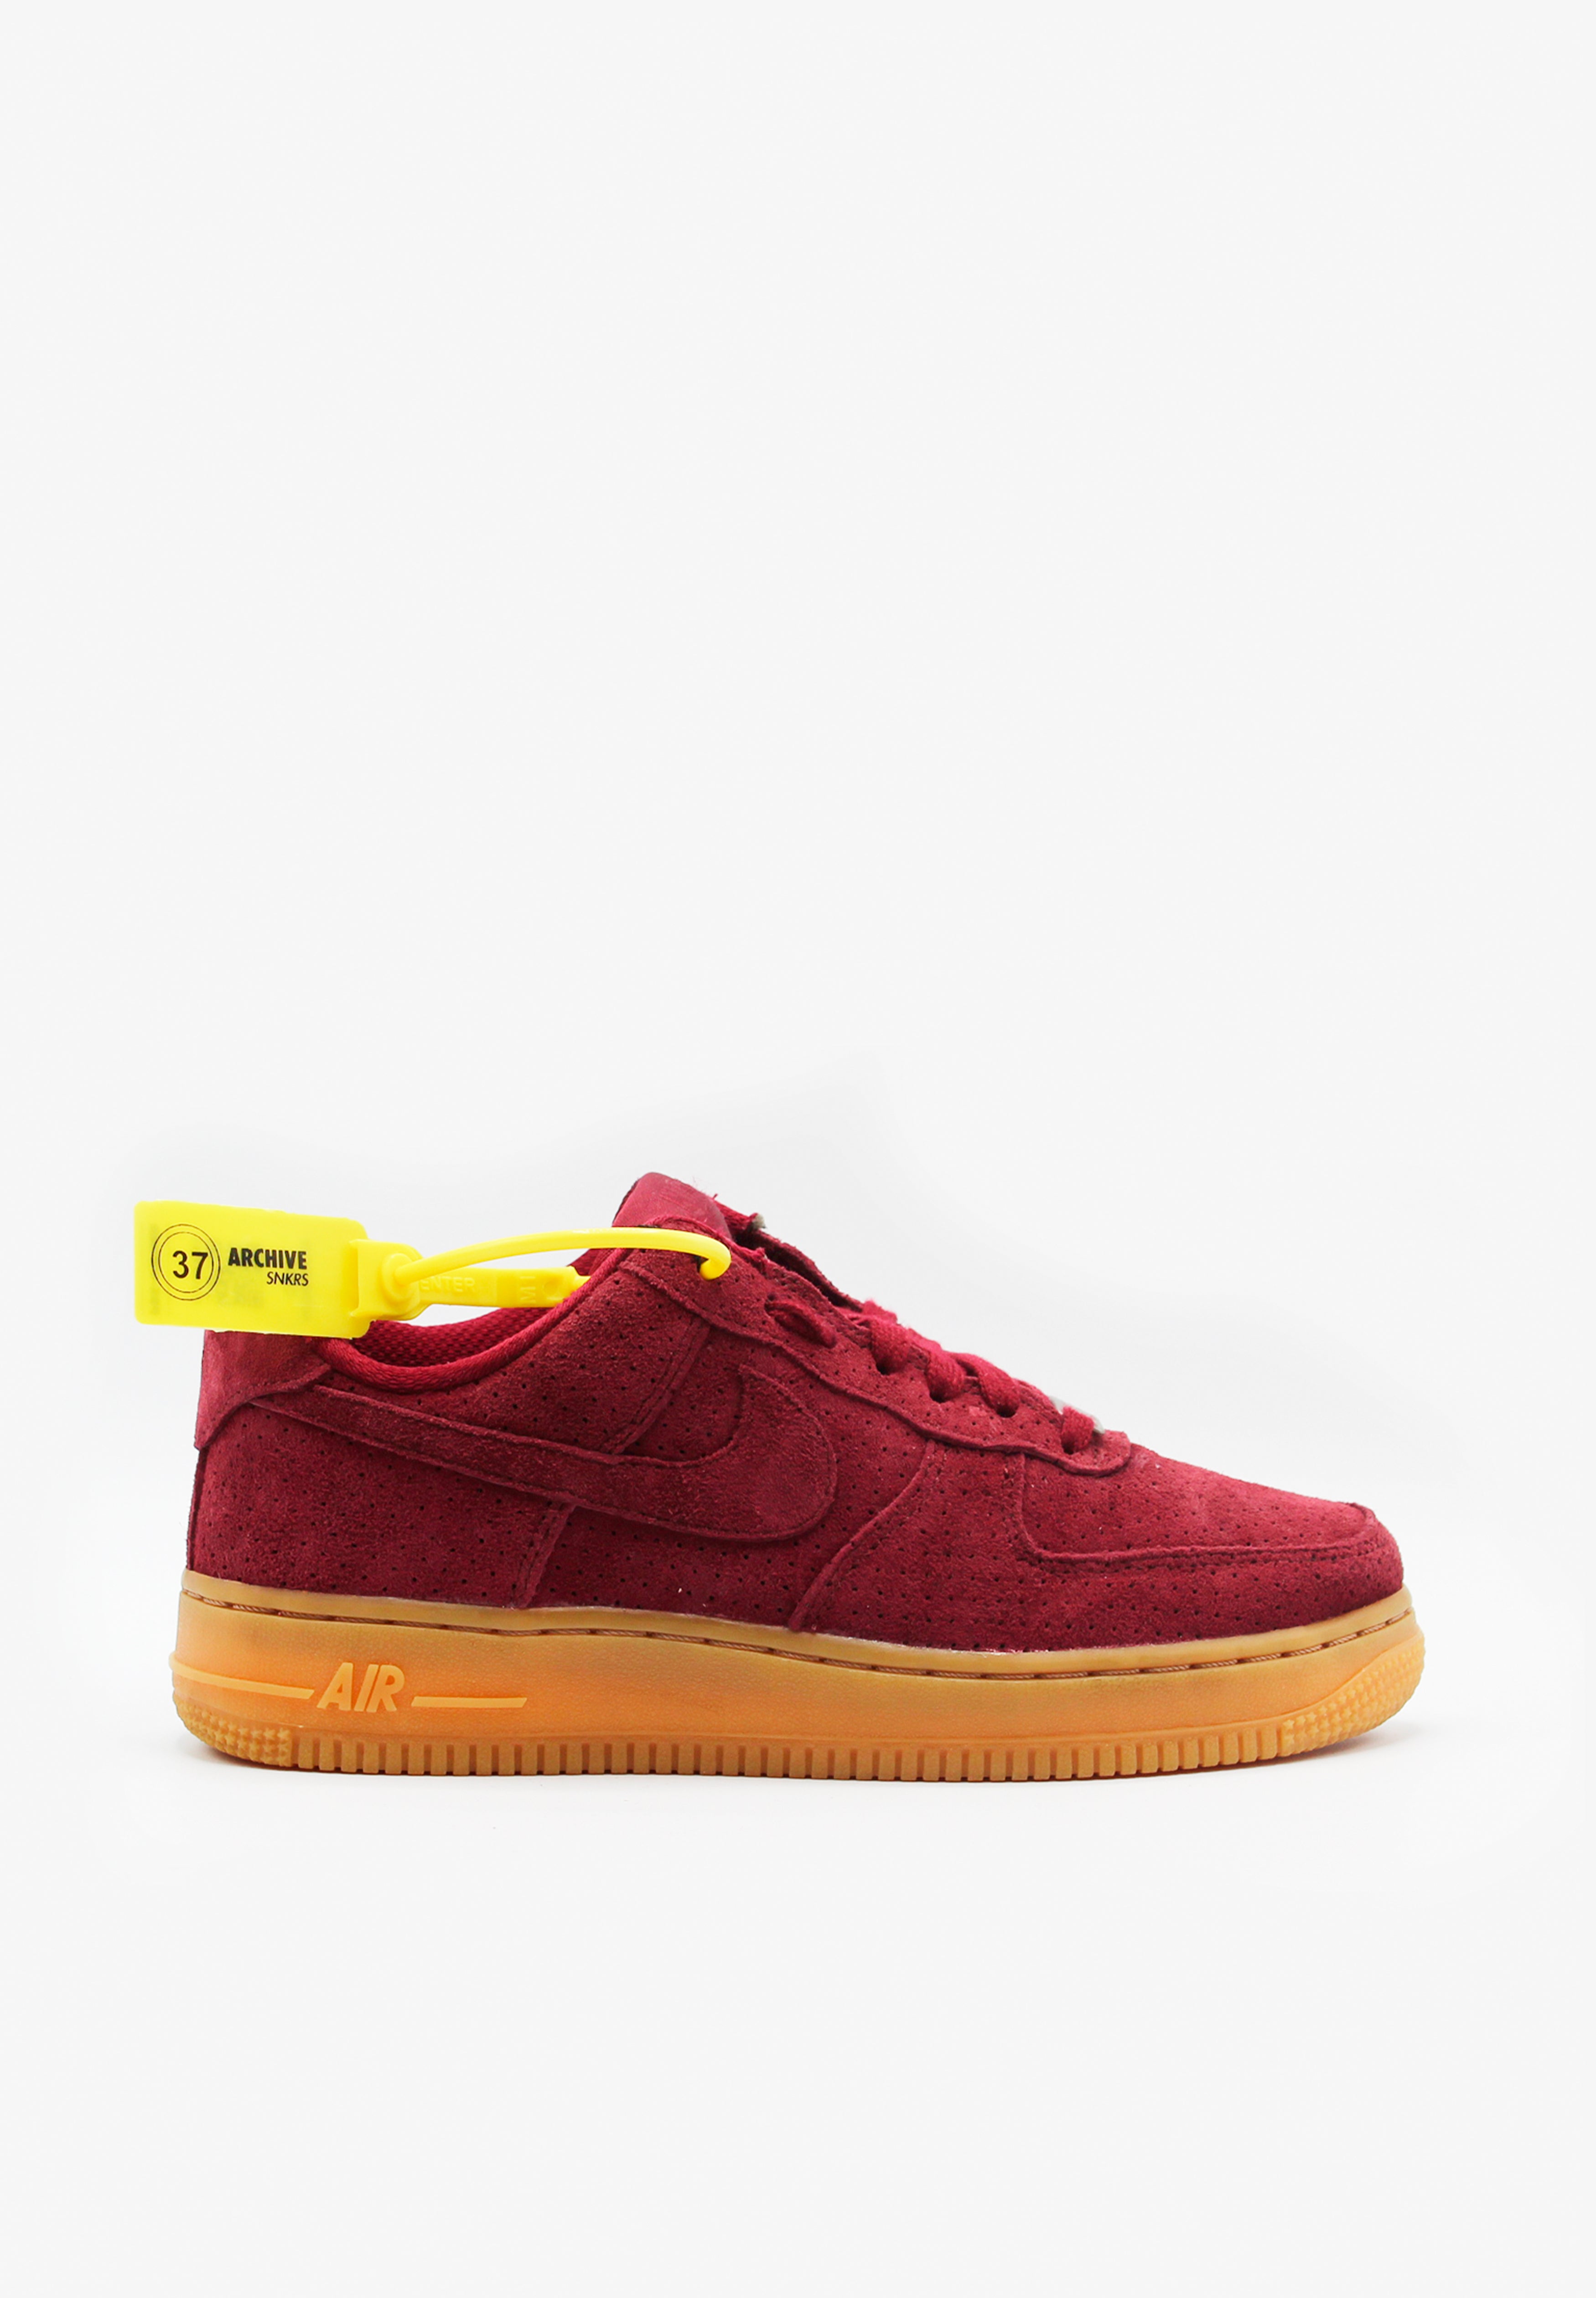 ARCHIVE SNEAKRS | SNEAKERS NIKE AIR FORCE 1 ´07 TALLA 37.5